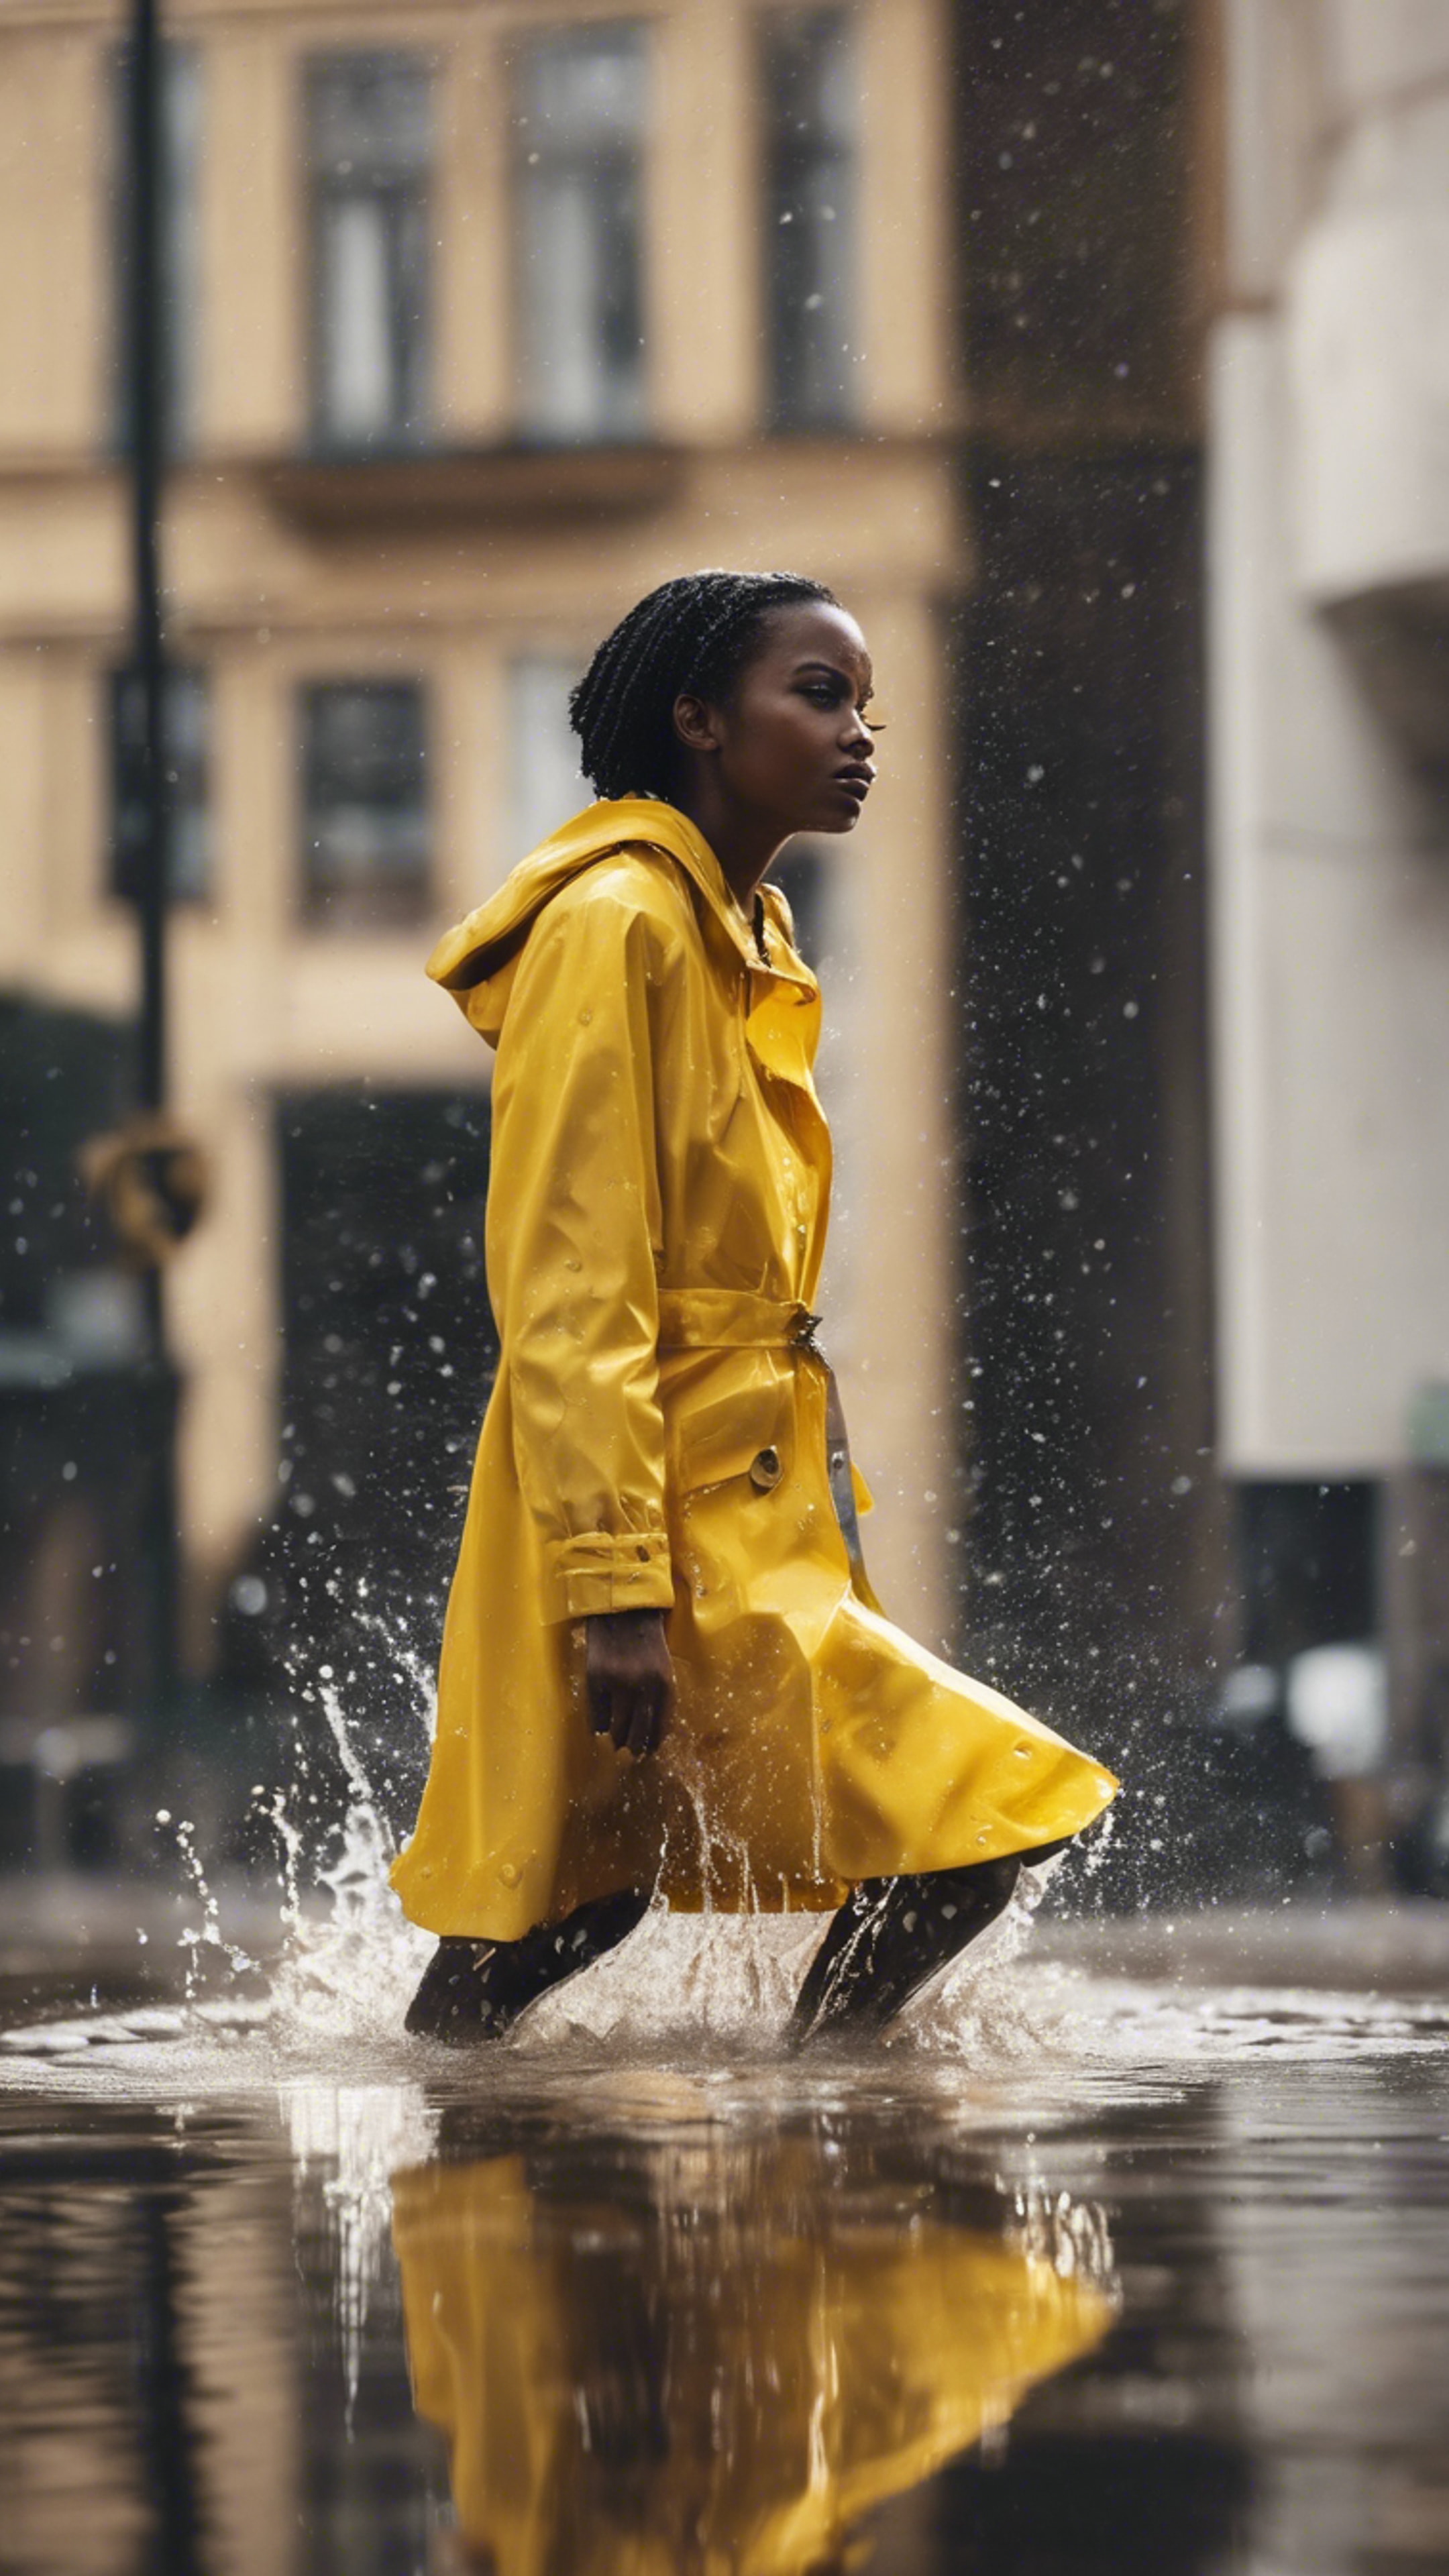 A black girl in a bright yellow raincoat splashing water in puddles after a heavy rain. Wallpaper[a80398e4c066404db875]